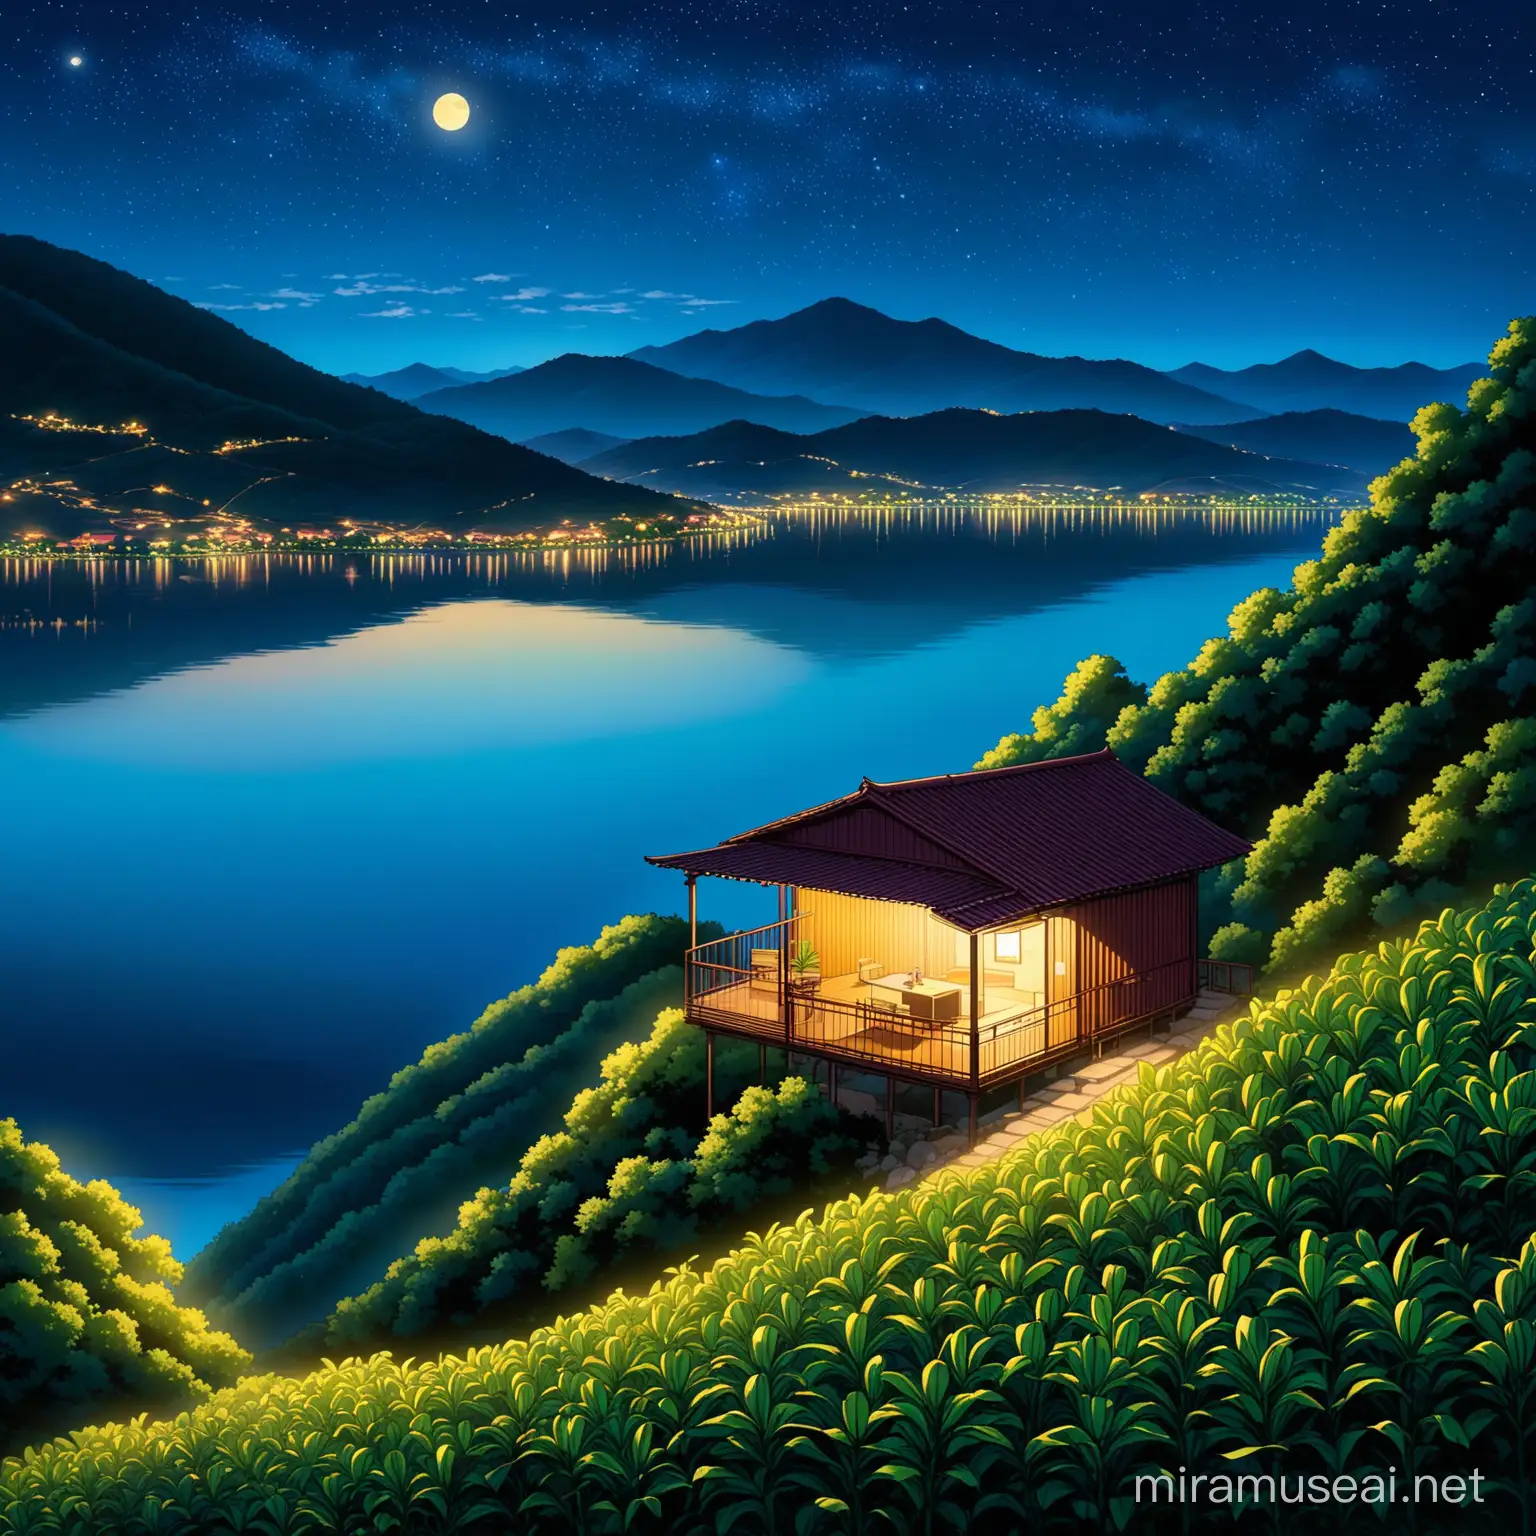 Serene Night Landscape with Mountain Lake and Fruit Trees